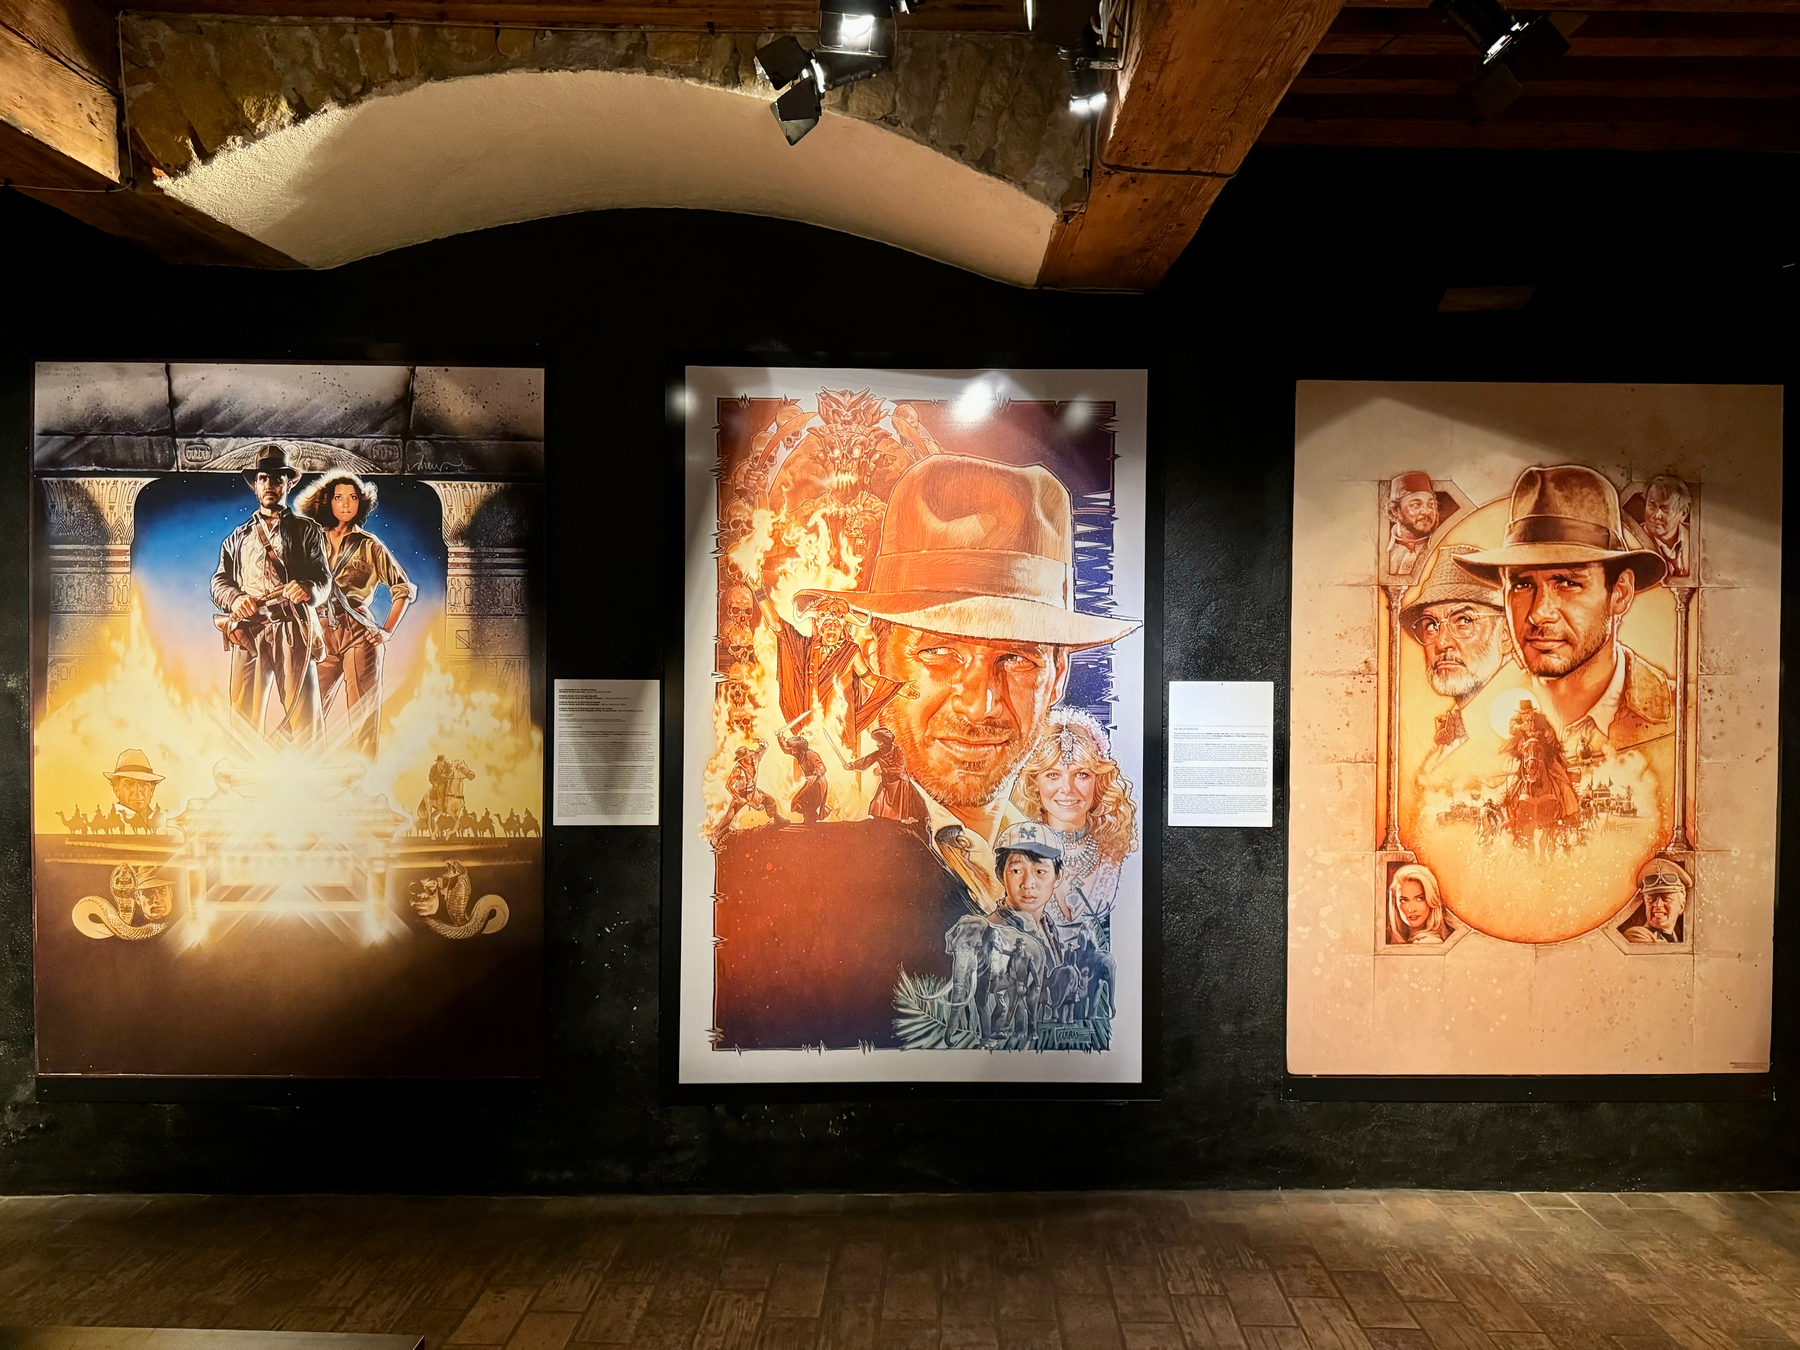 Three framed movie posters depicting the original Indiana Jones films, displayed in an exhibition with spot lighting and wooden beams in the background.